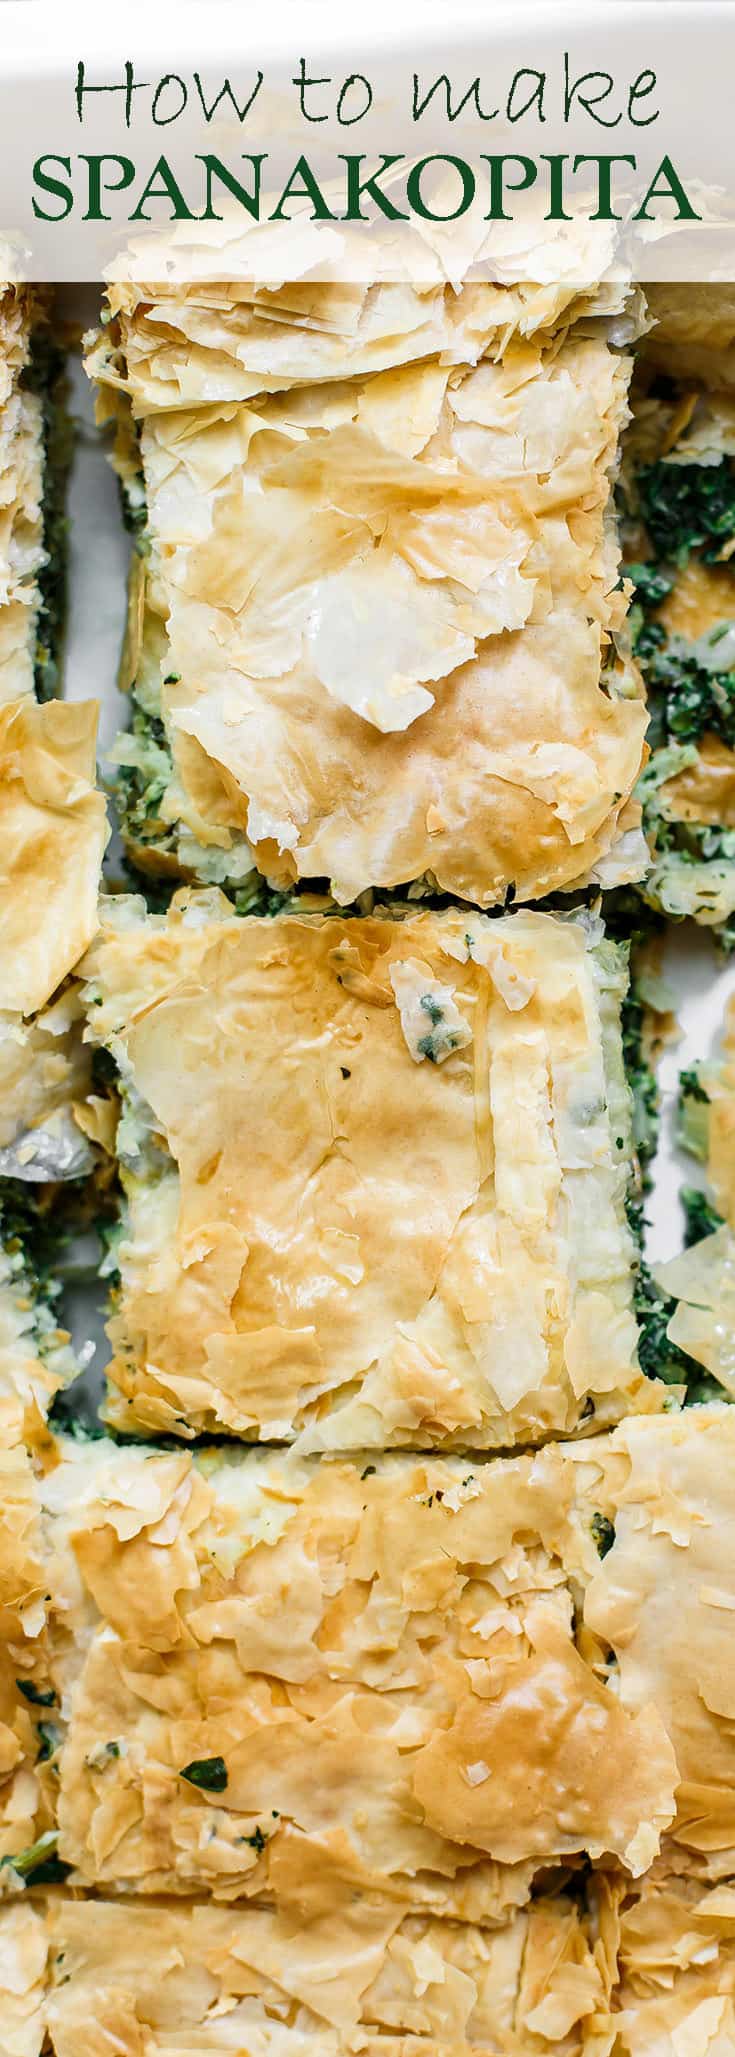 Spanakopita Recipe (Greek Spinach Pie) | The Mediterranean Dish. The best tutorial for how to make spanakopita. Greek spinach pie with crispy, golden phyllo and a soft filling of spinach, feta cheese, and herbs. A holiday recipe for make it for dinner! So easy. See it at TheMediterraneanDish.com